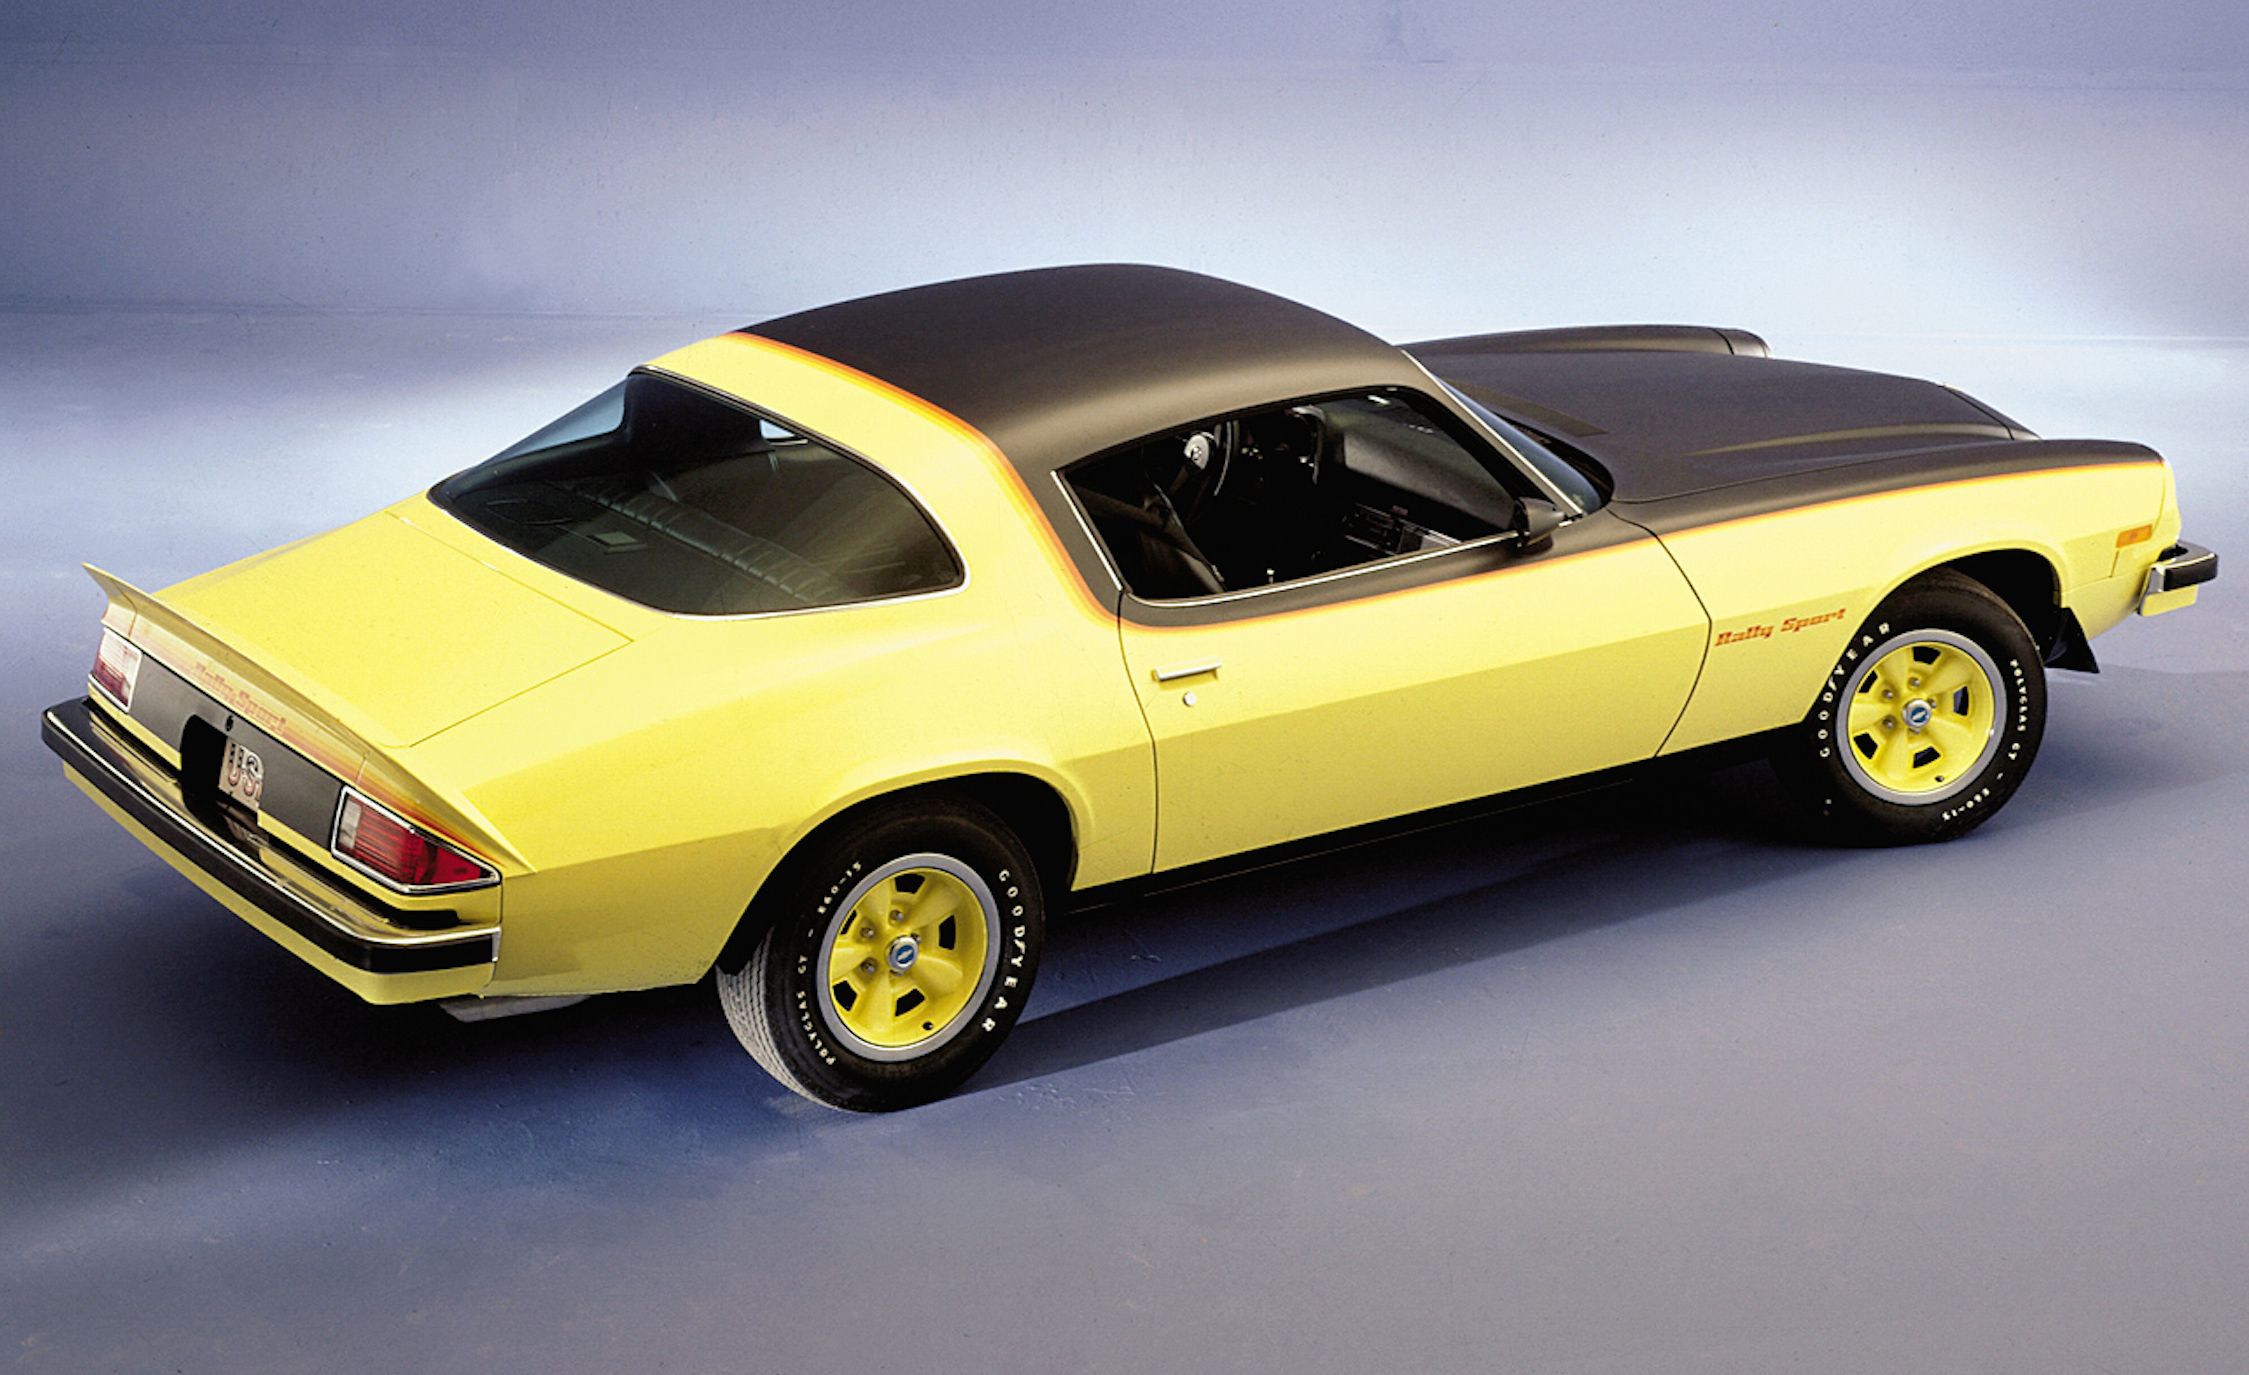 The History Of The Chevrolet Camaro From 1967 To Today